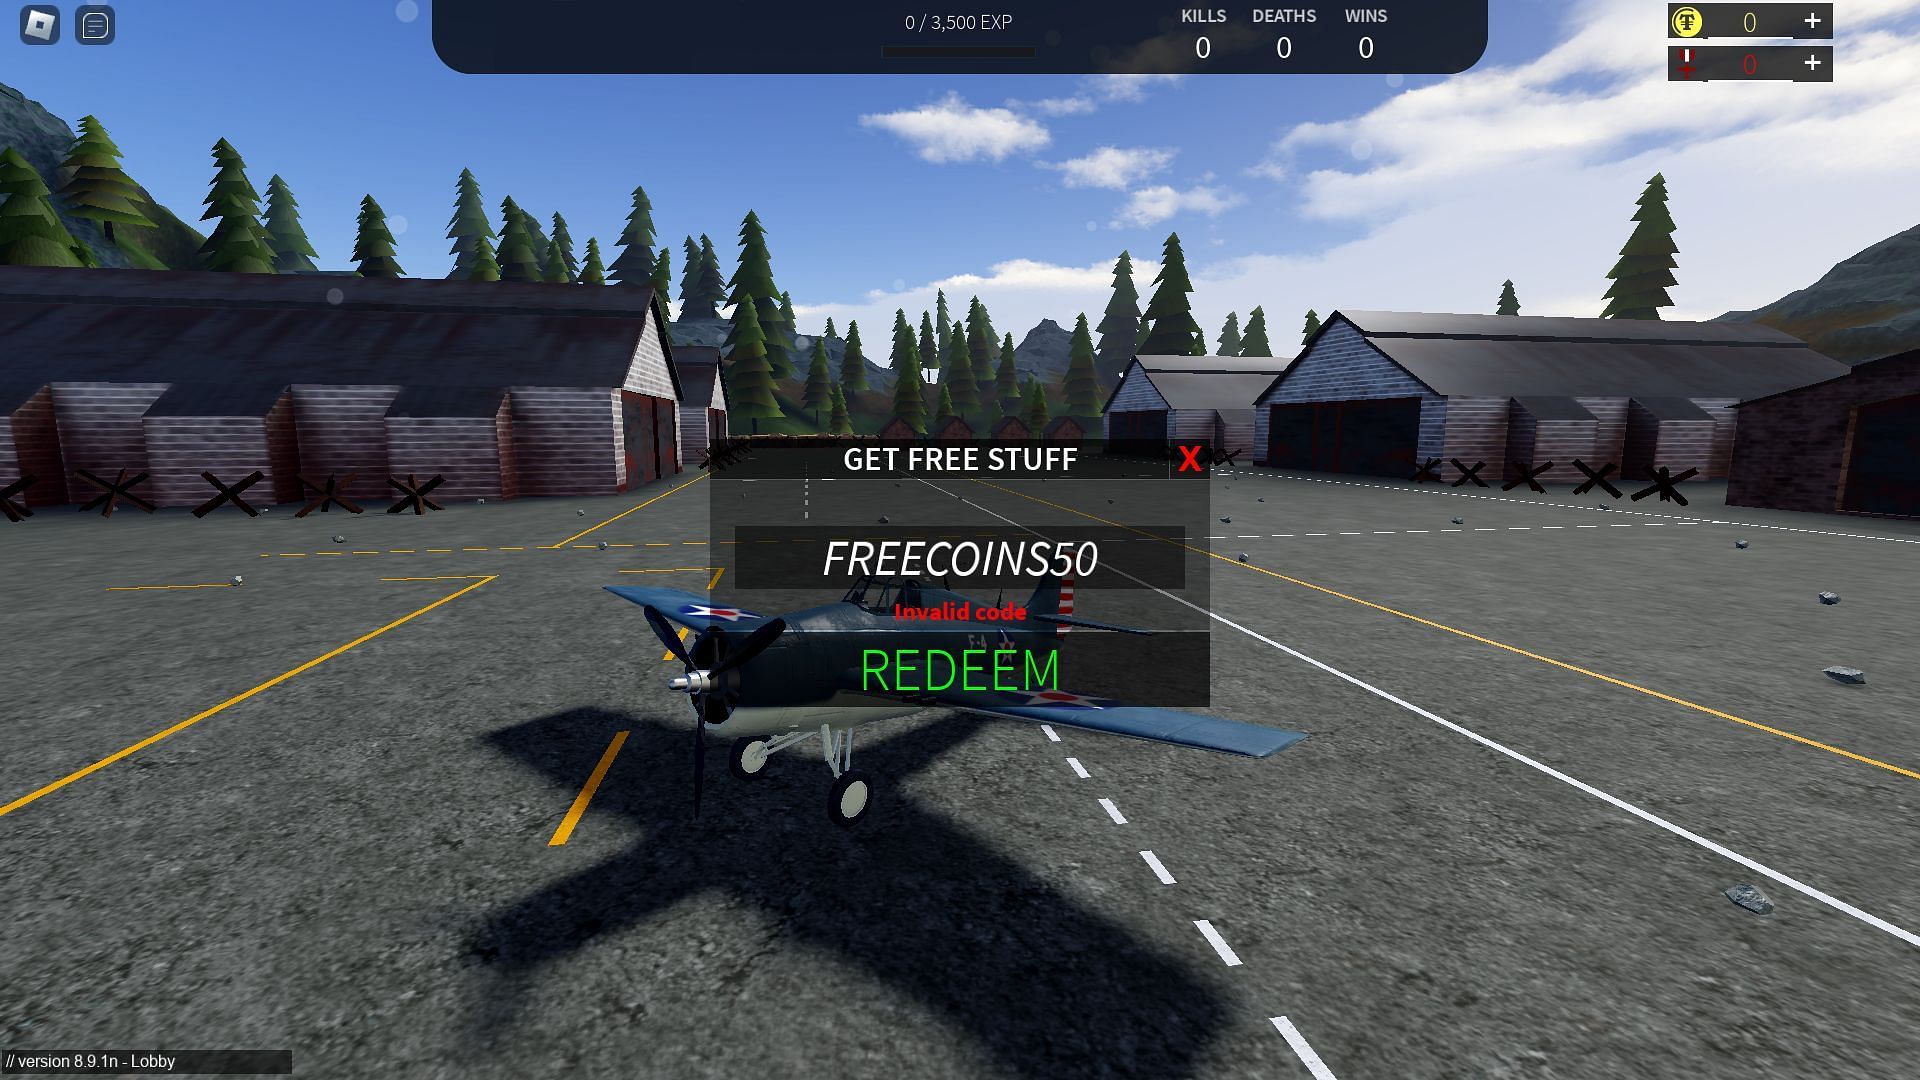 Troubleshooting codes for Wings of Glory (Image via Roblox)